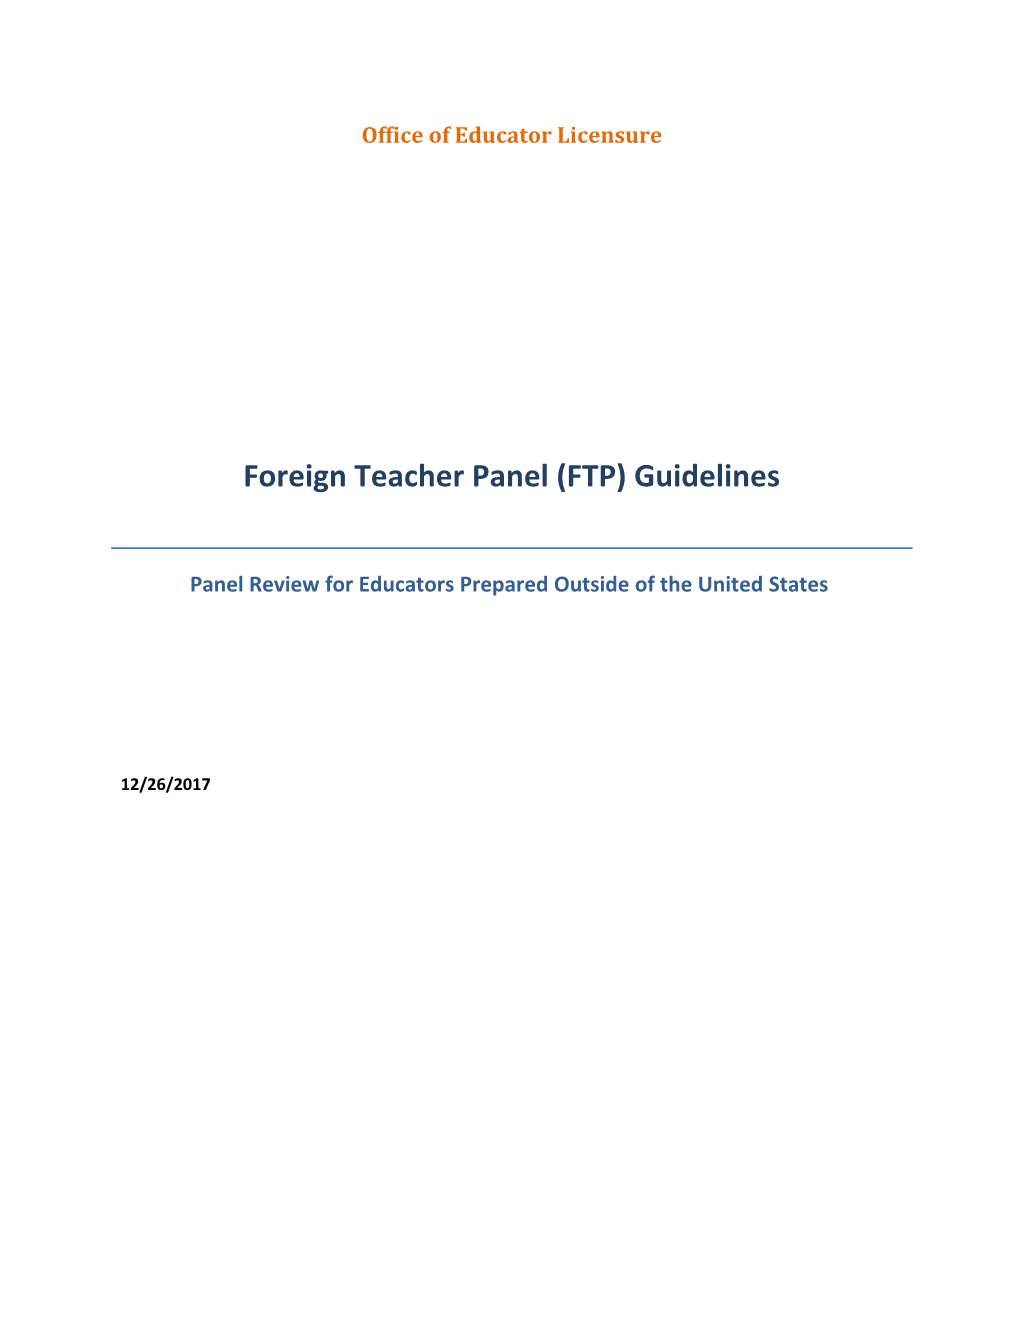 Foreign Teacher Panel Guidelines